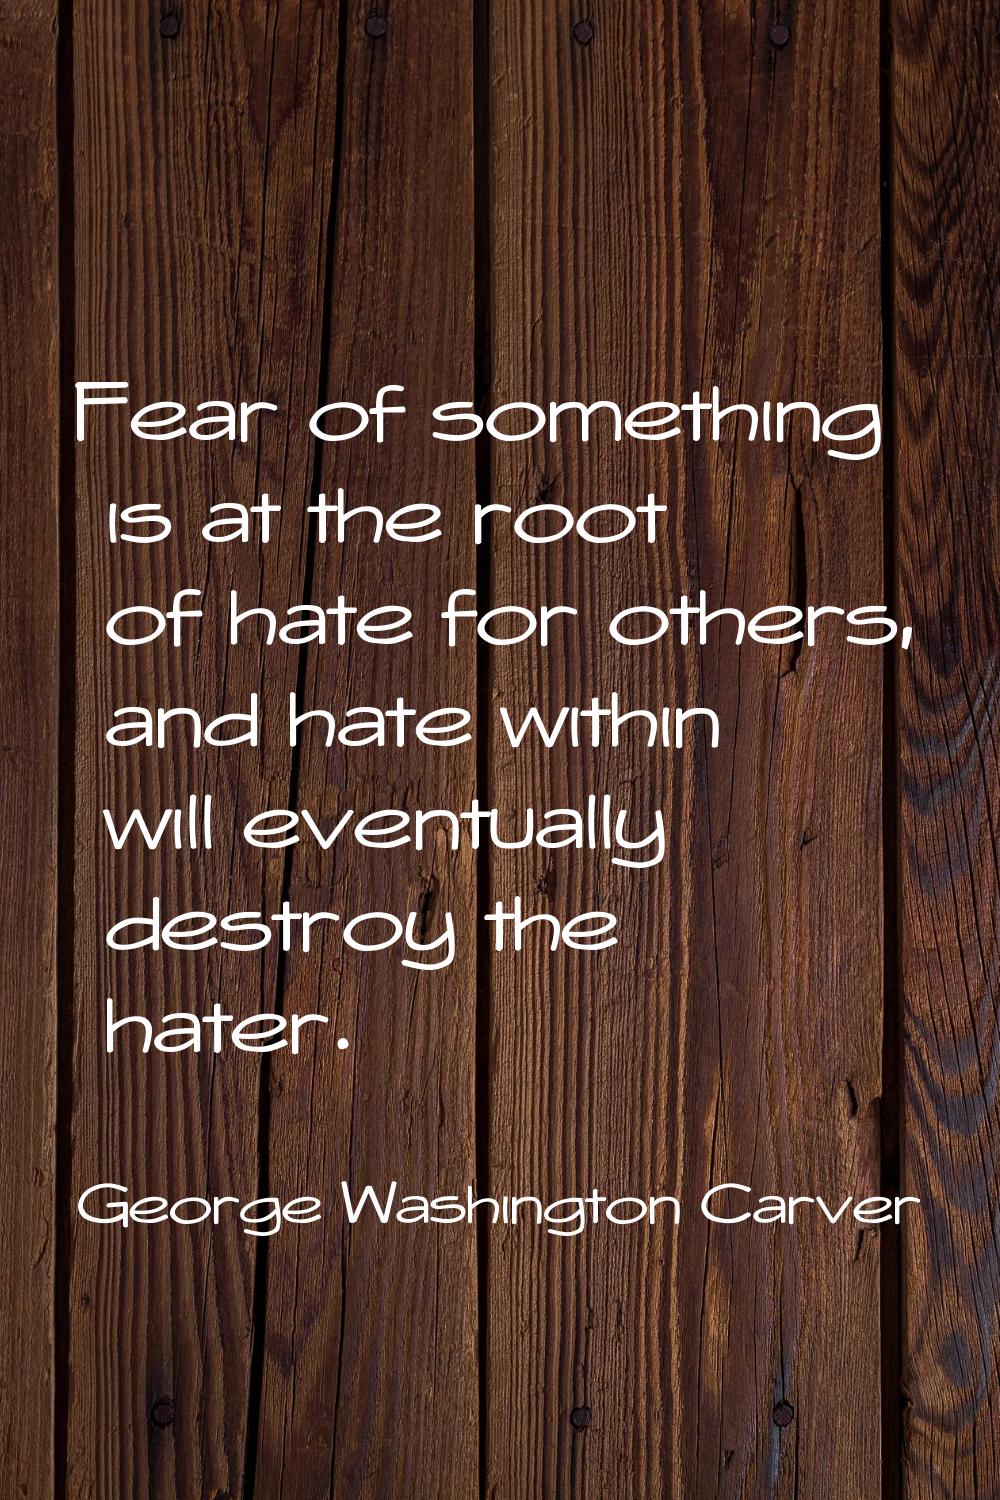 Fear of something is at the root of hate for others, and hate within will eventually destroy the ha